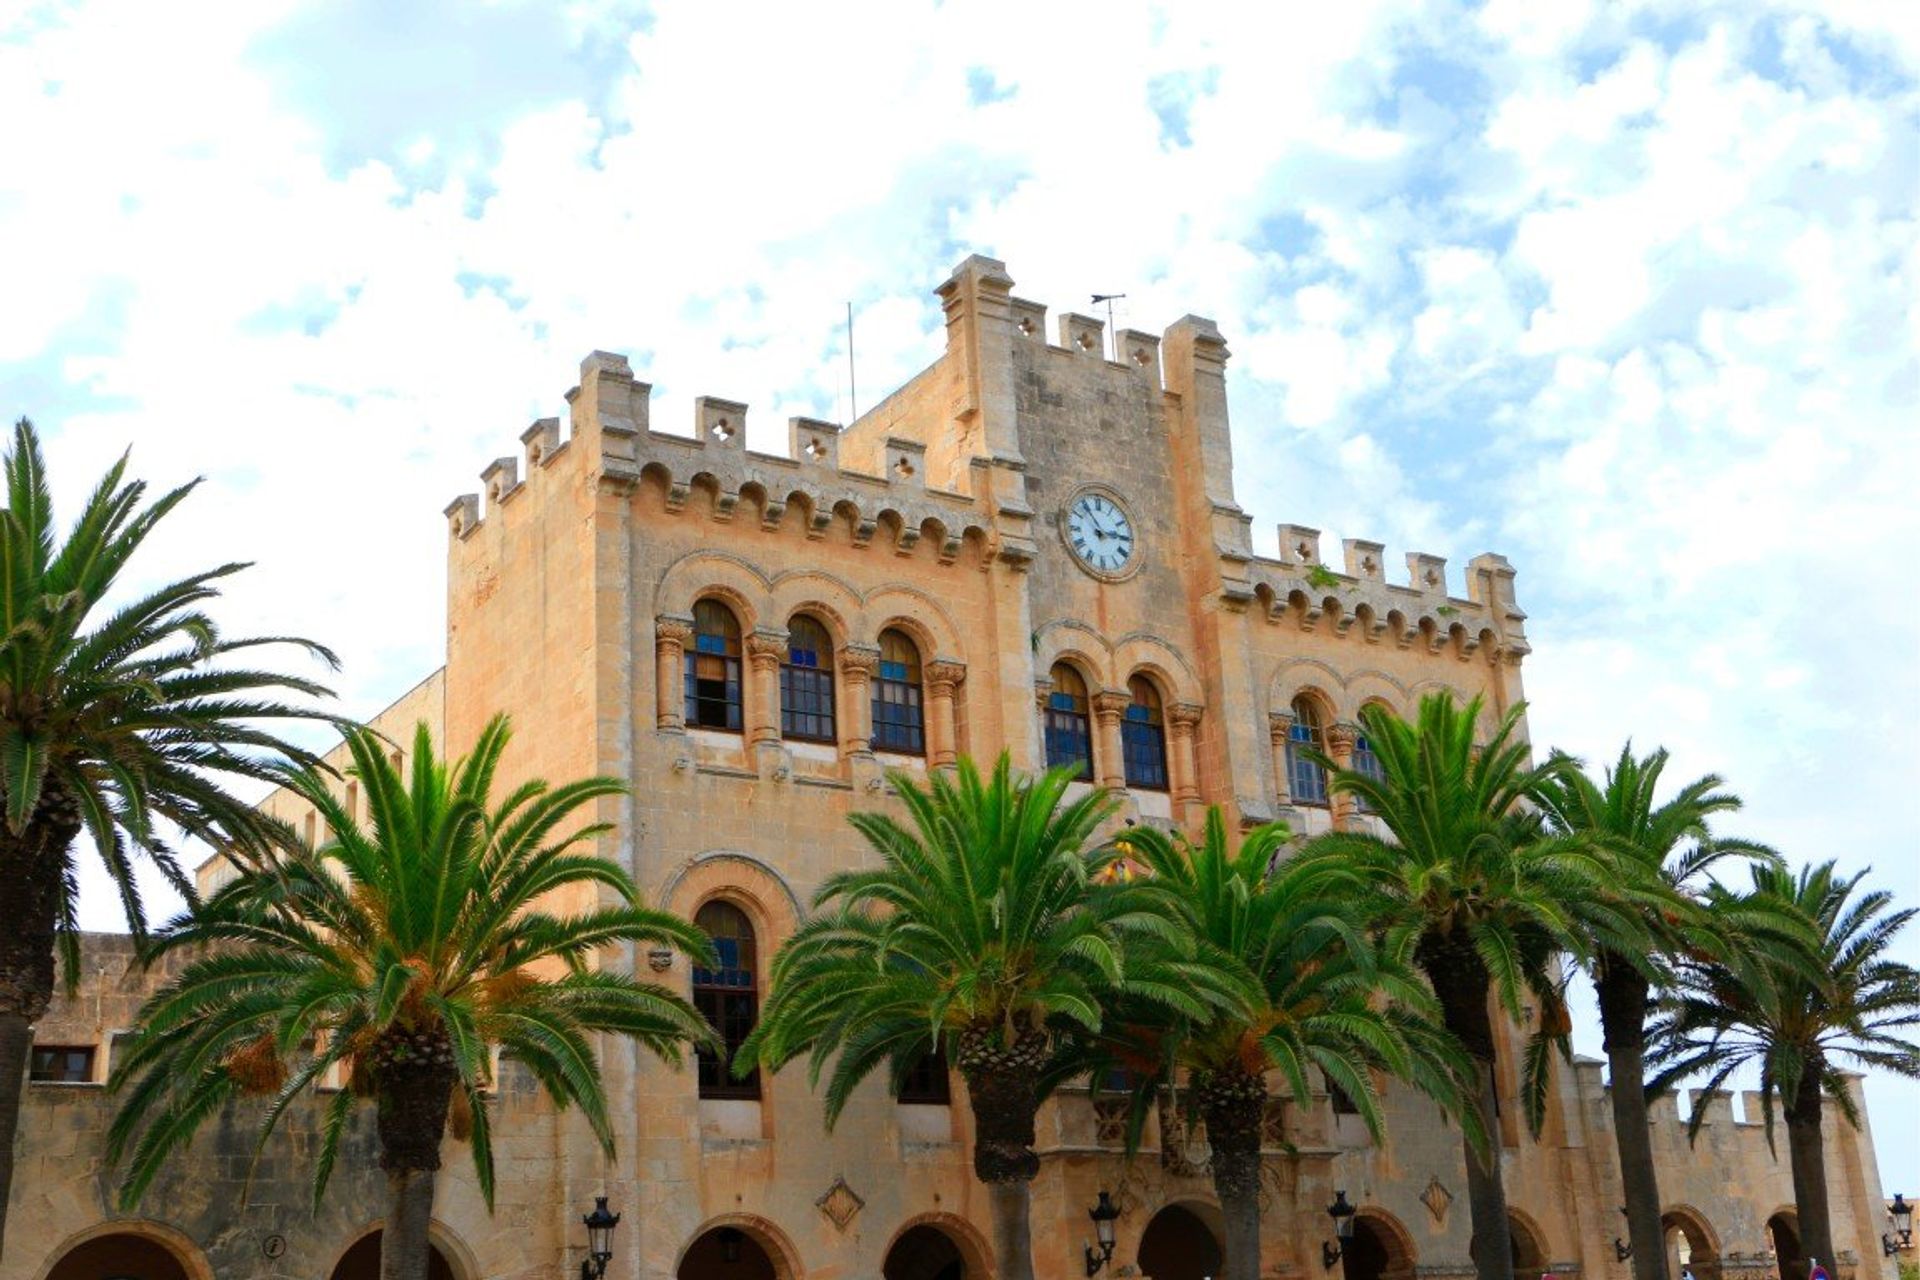 Cuitadella's town hall is a former royal palace of the Arab governor